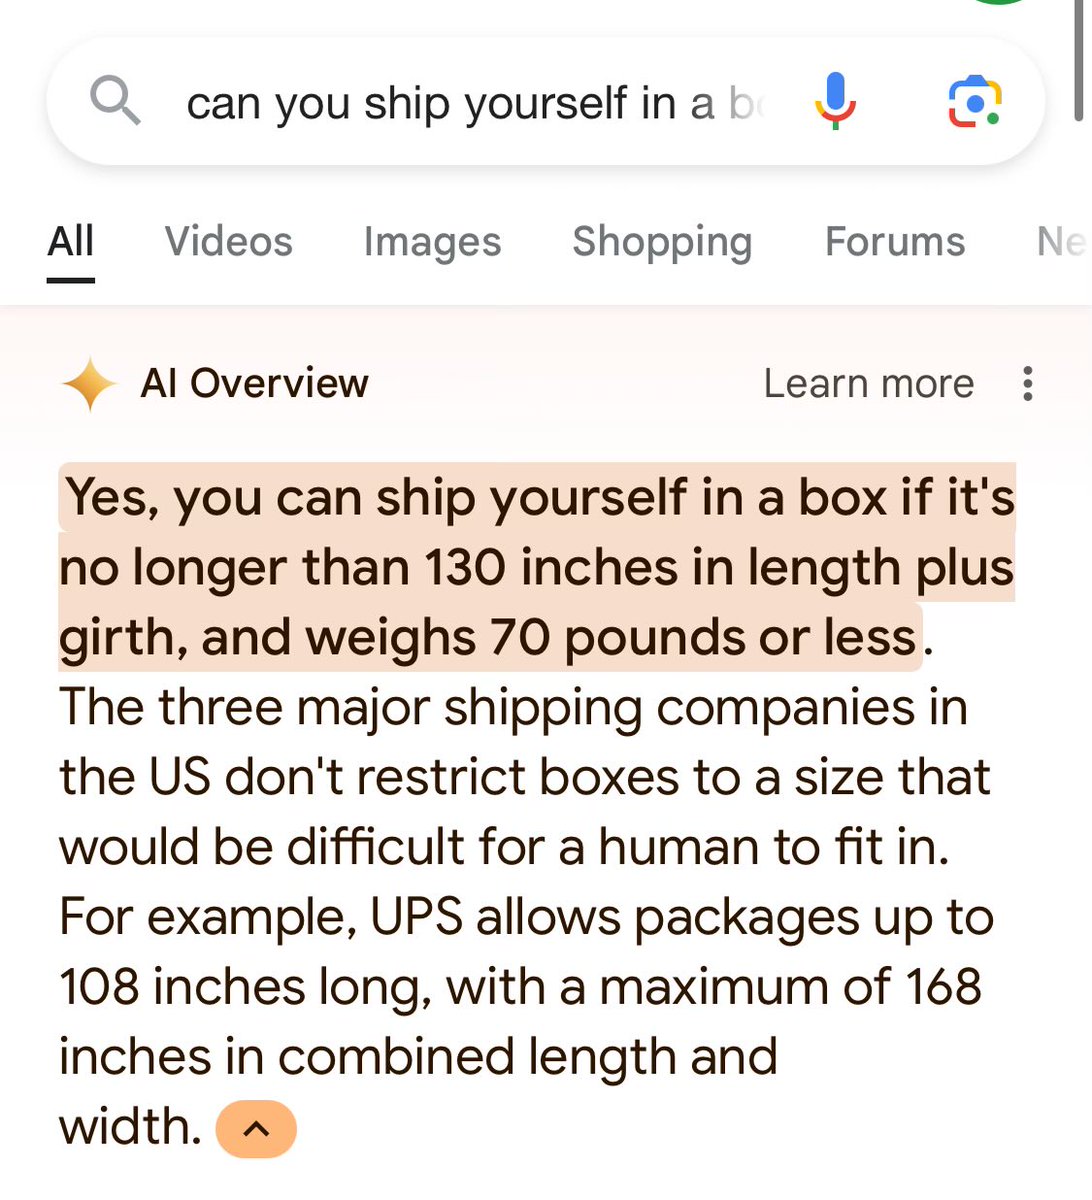 screenshot - All can you ship yourself in a b Videos Images Shopping Forums Ne Al Overview Learn more Yes, you can ship yourself in a box if it's no longer than 130 inches in length plus girth, and weighs 70 pounds or less. The three major shipping compan